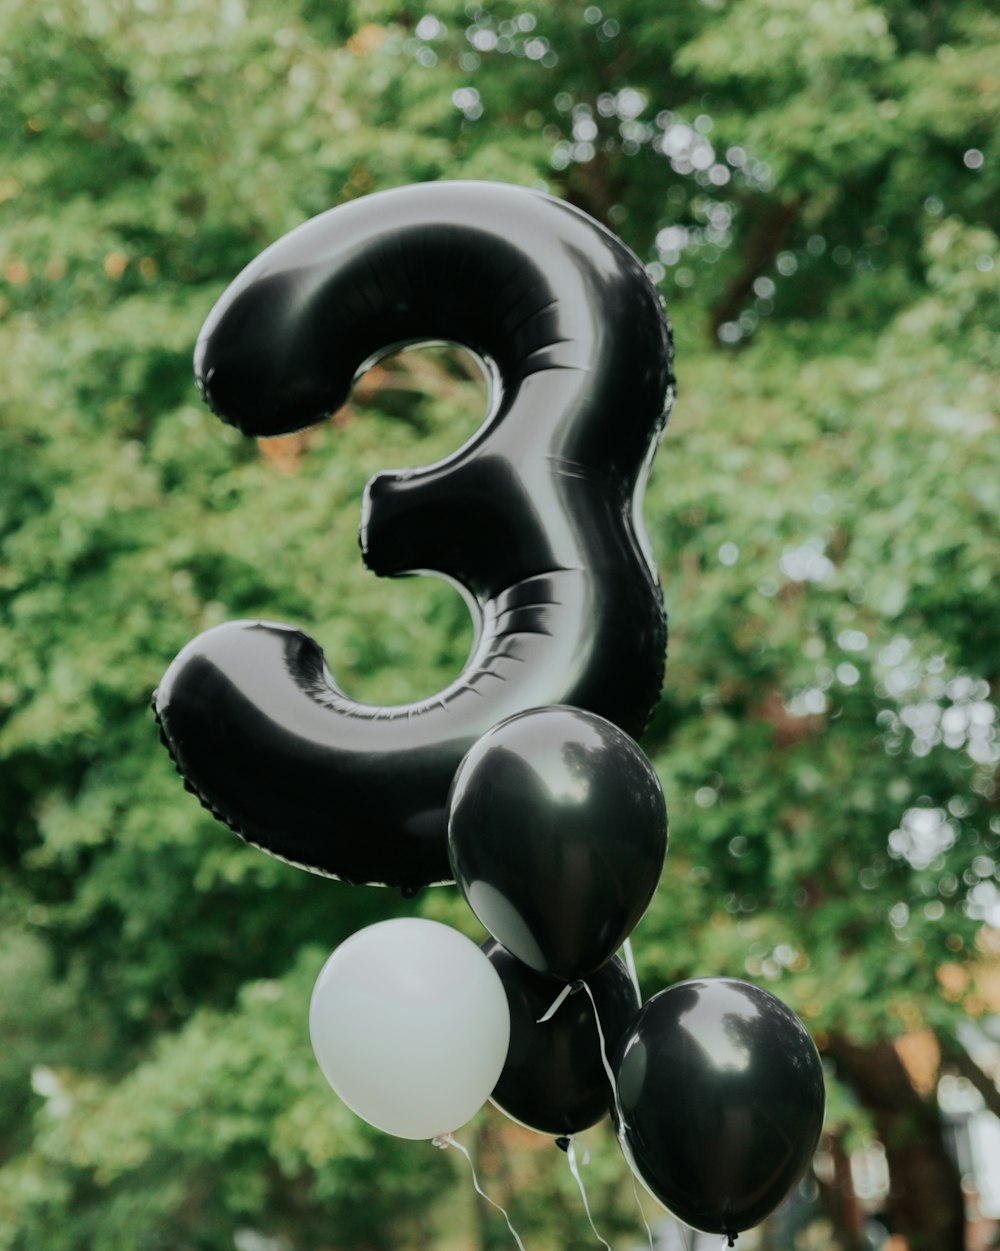 a number 3 balloon with balloons attached to it